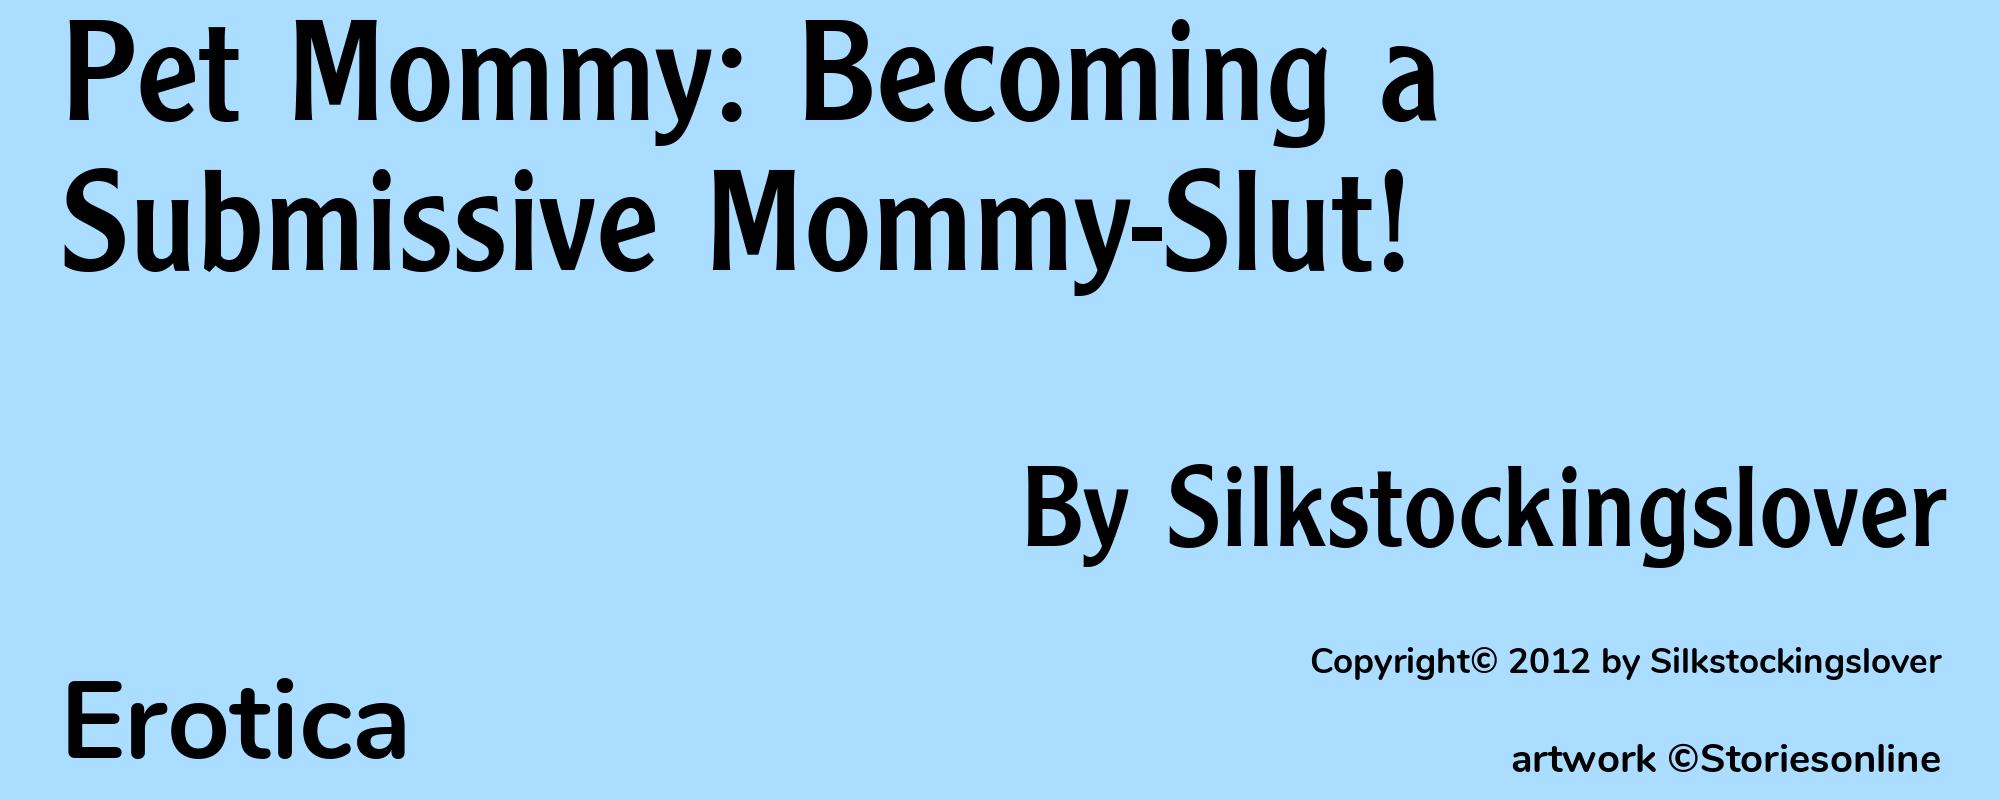 Pet Mommy: Becoming a Submissive Mommy-Slut! - Cover